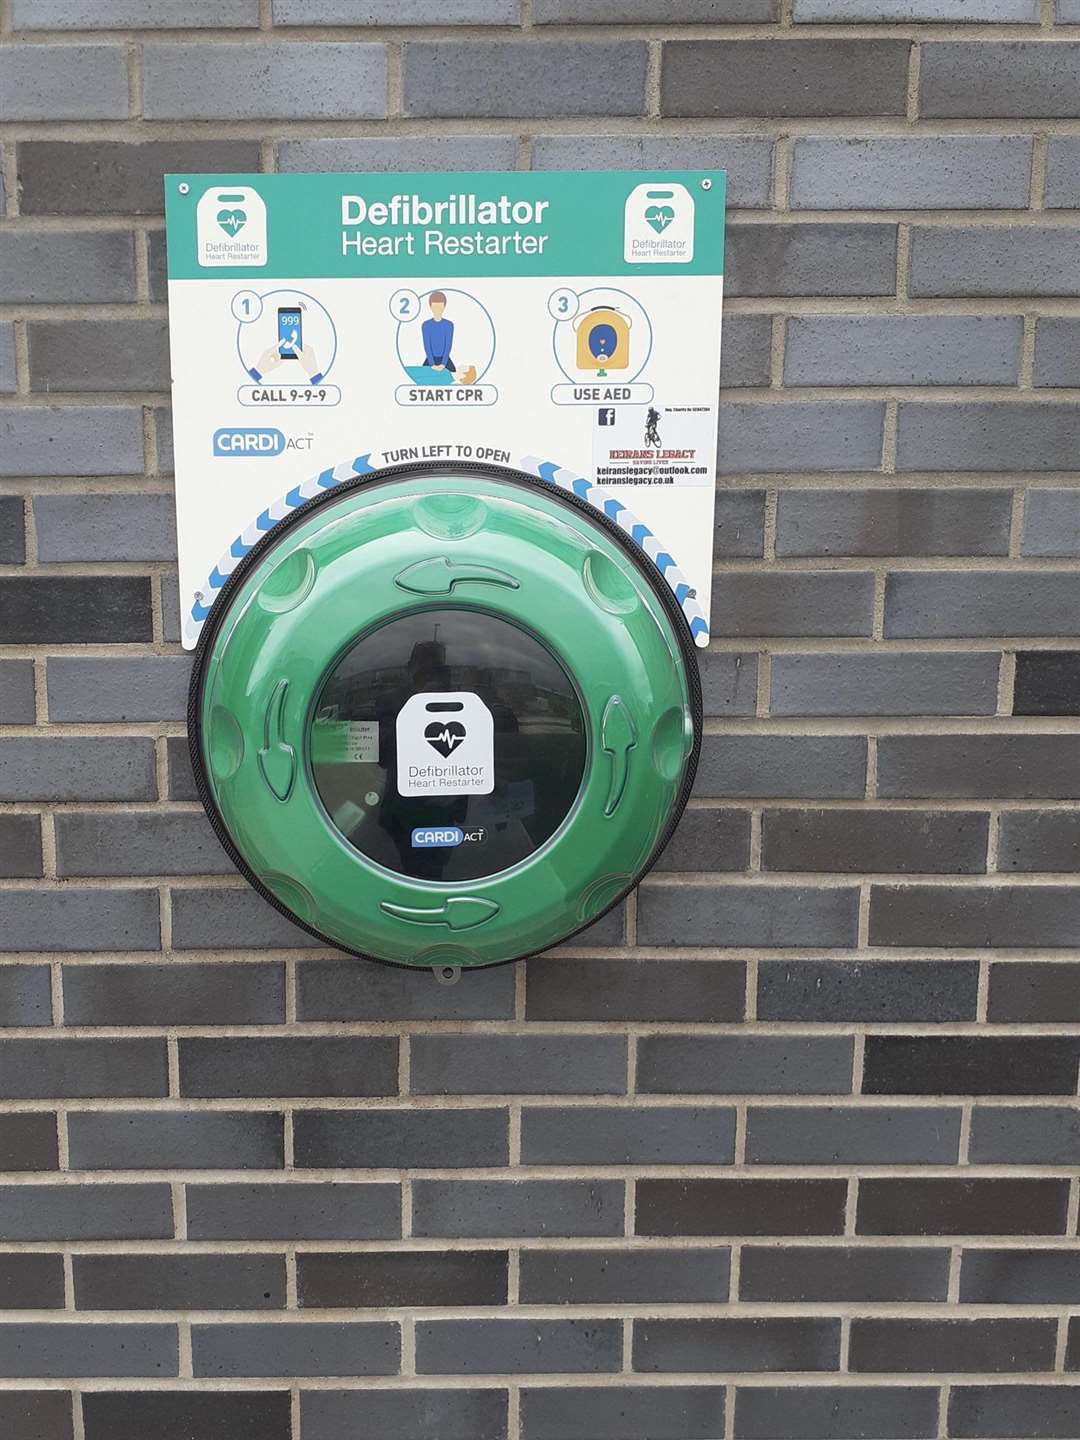 A new defibrillator has been installed at Inverurie Community Campus